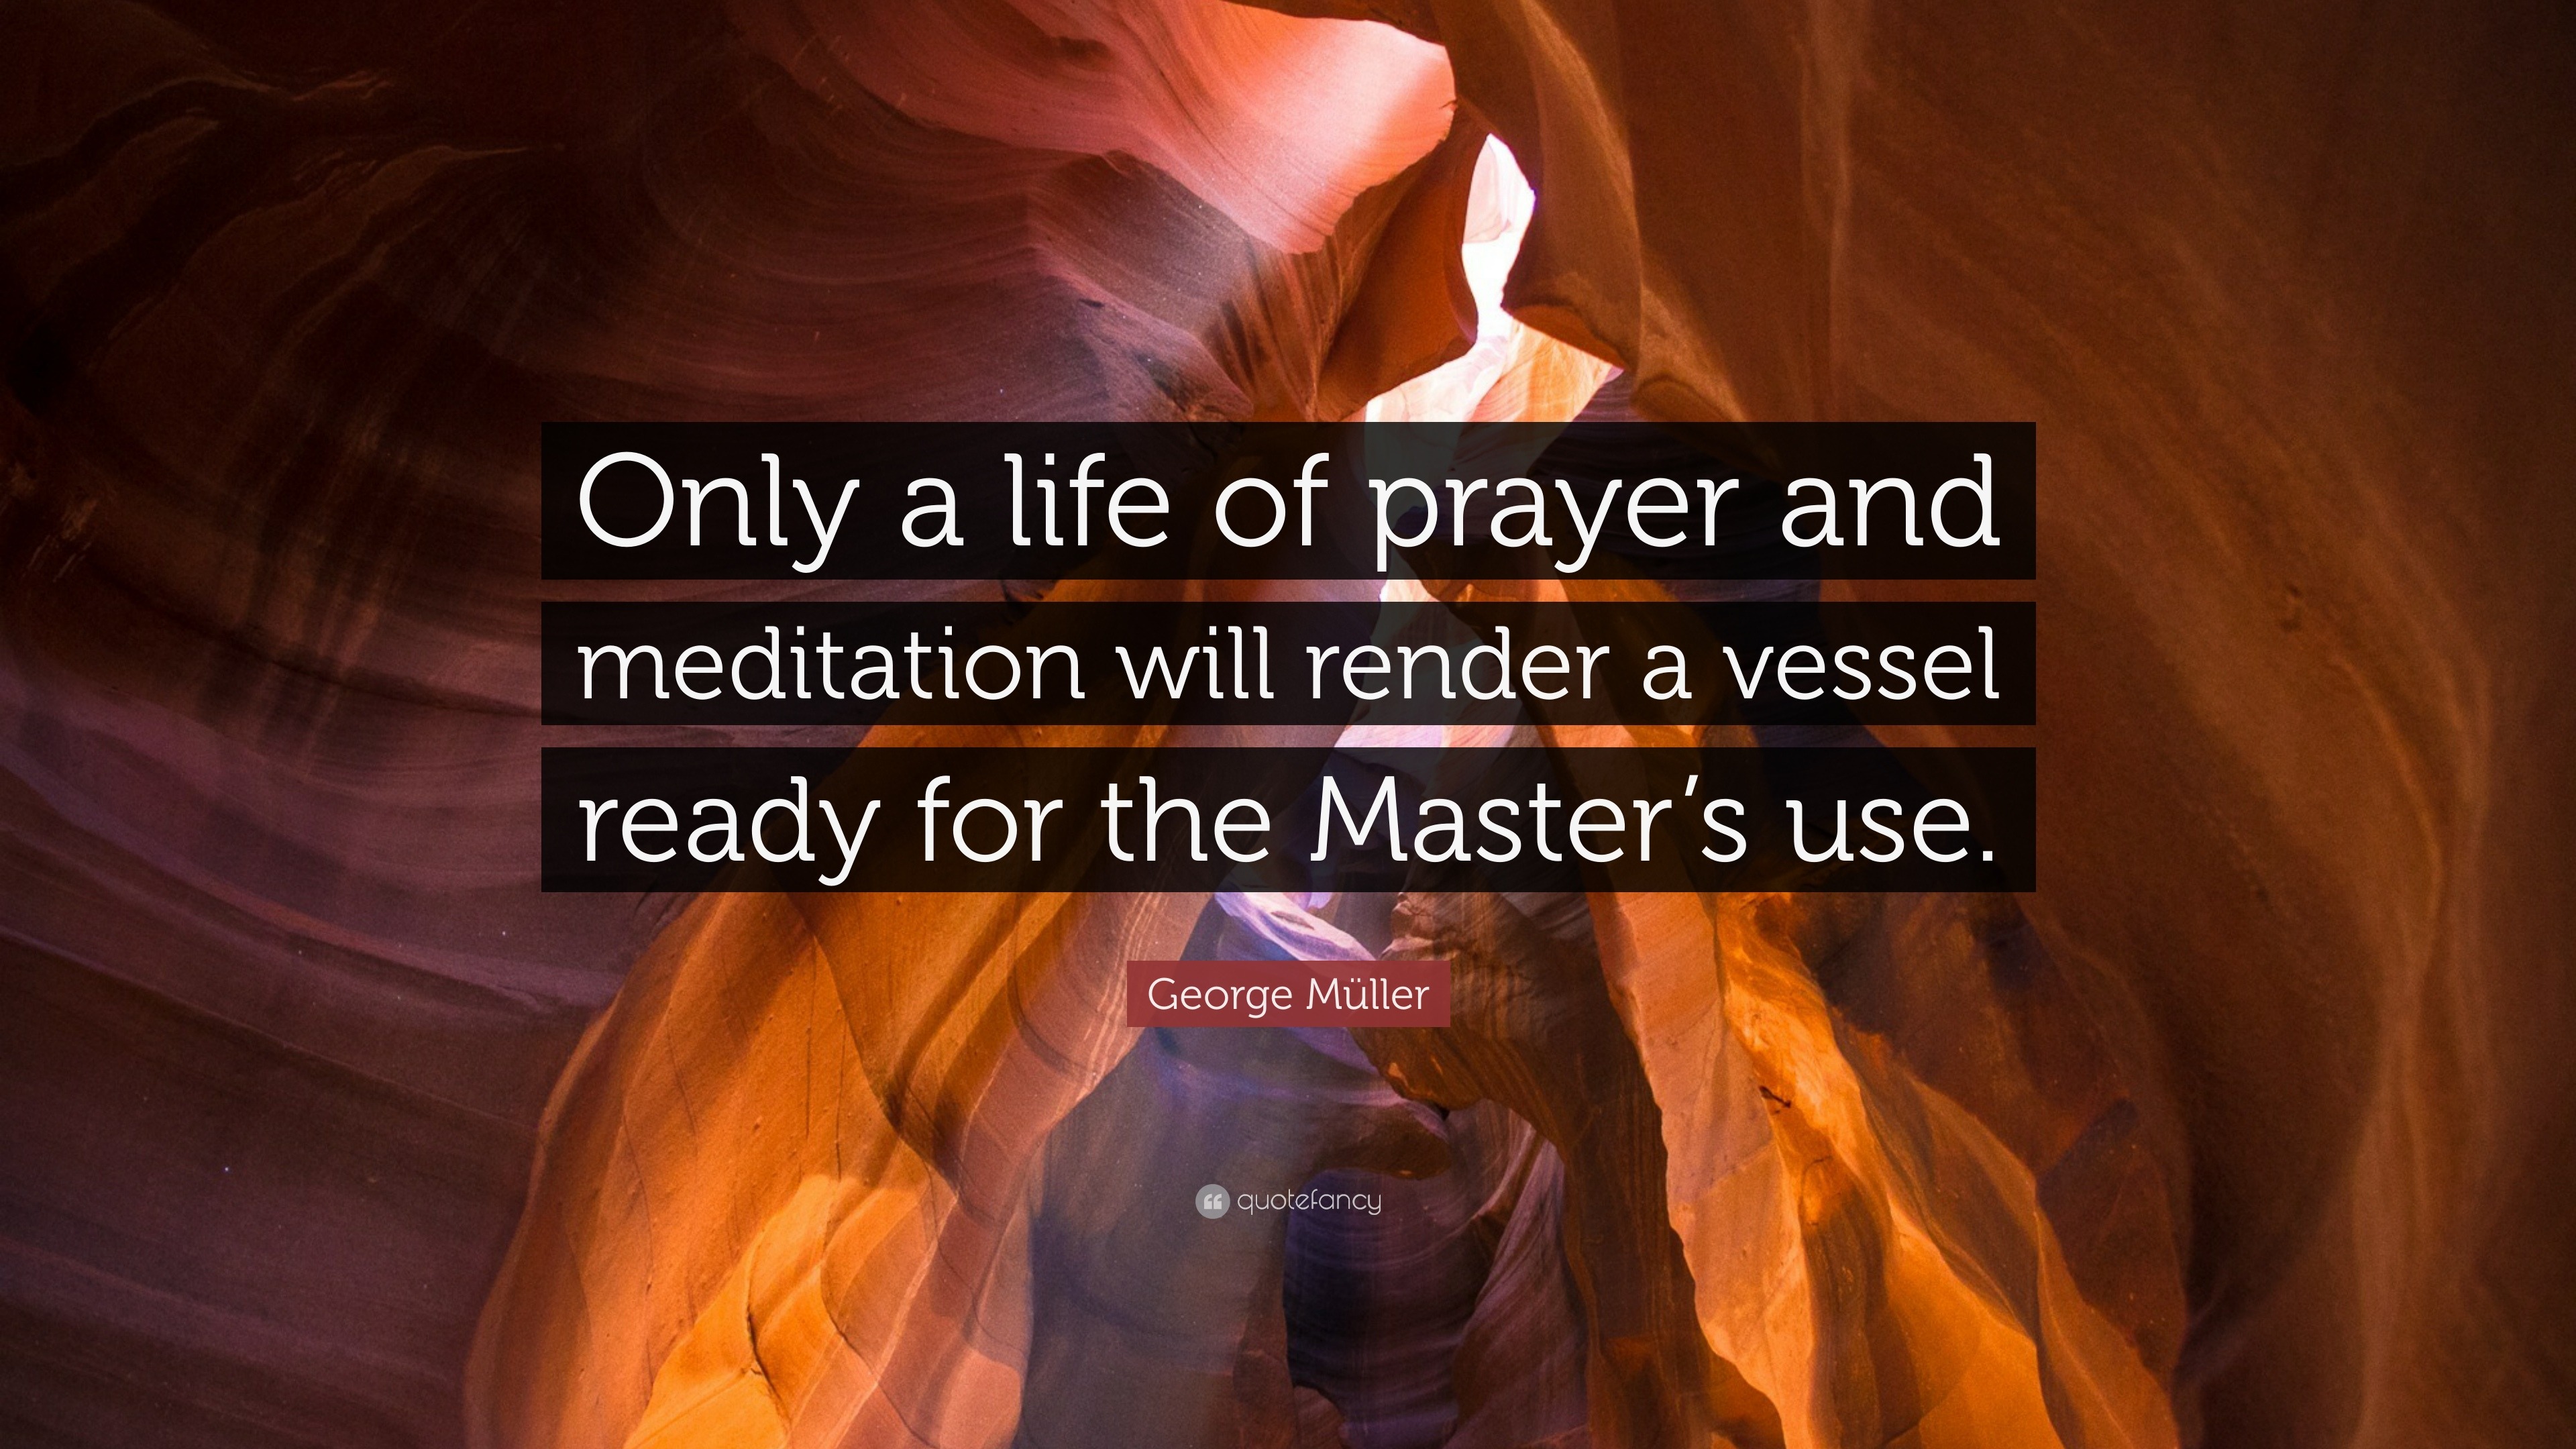 Müller Quote “Only a life of prayer and meditation will render